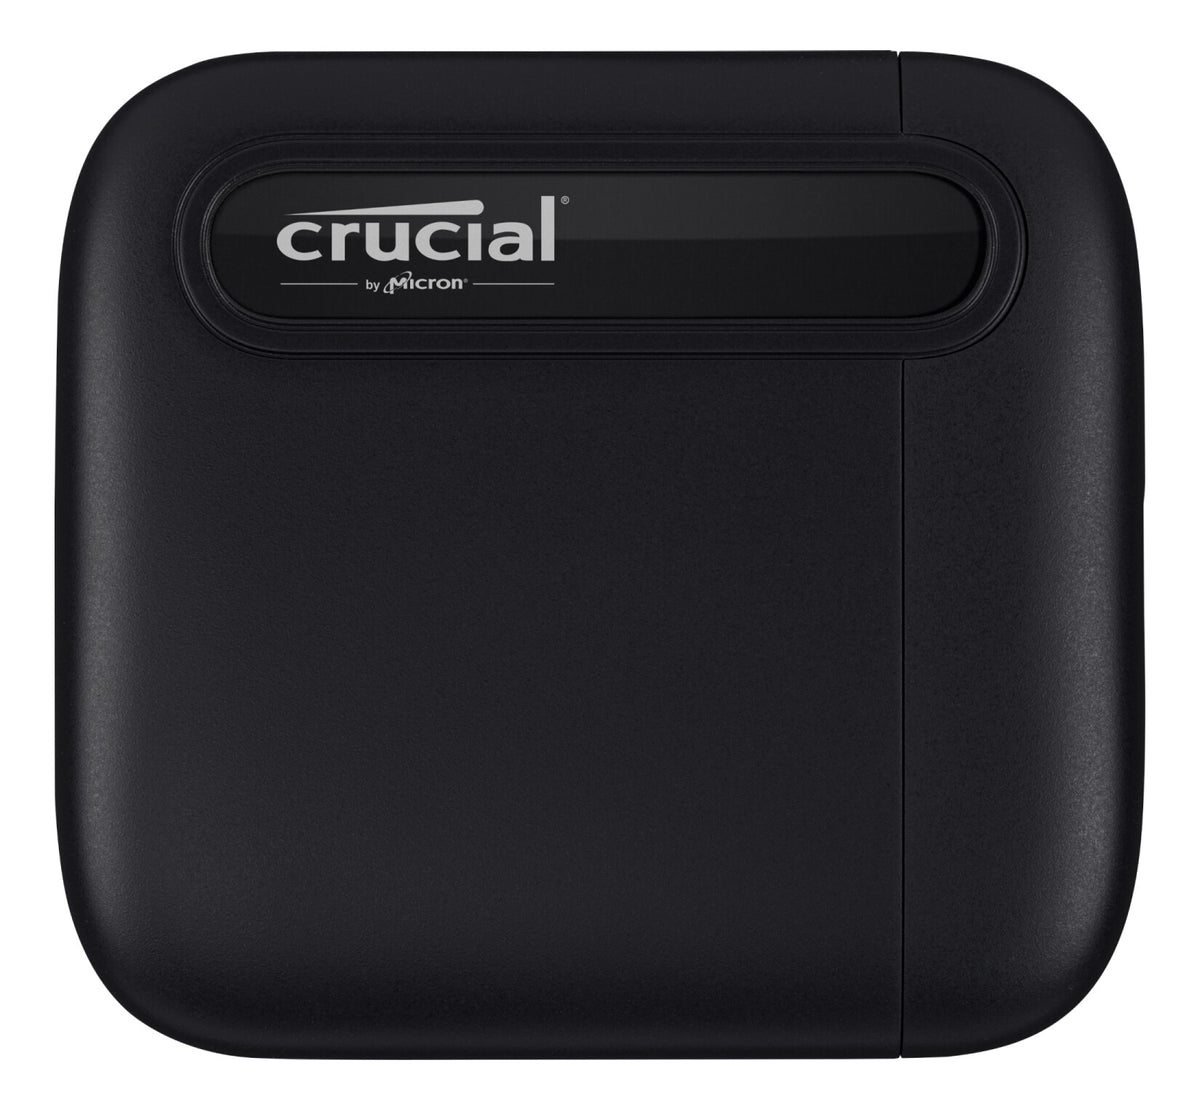 Crucial X6 External solid state drive - 2 TB